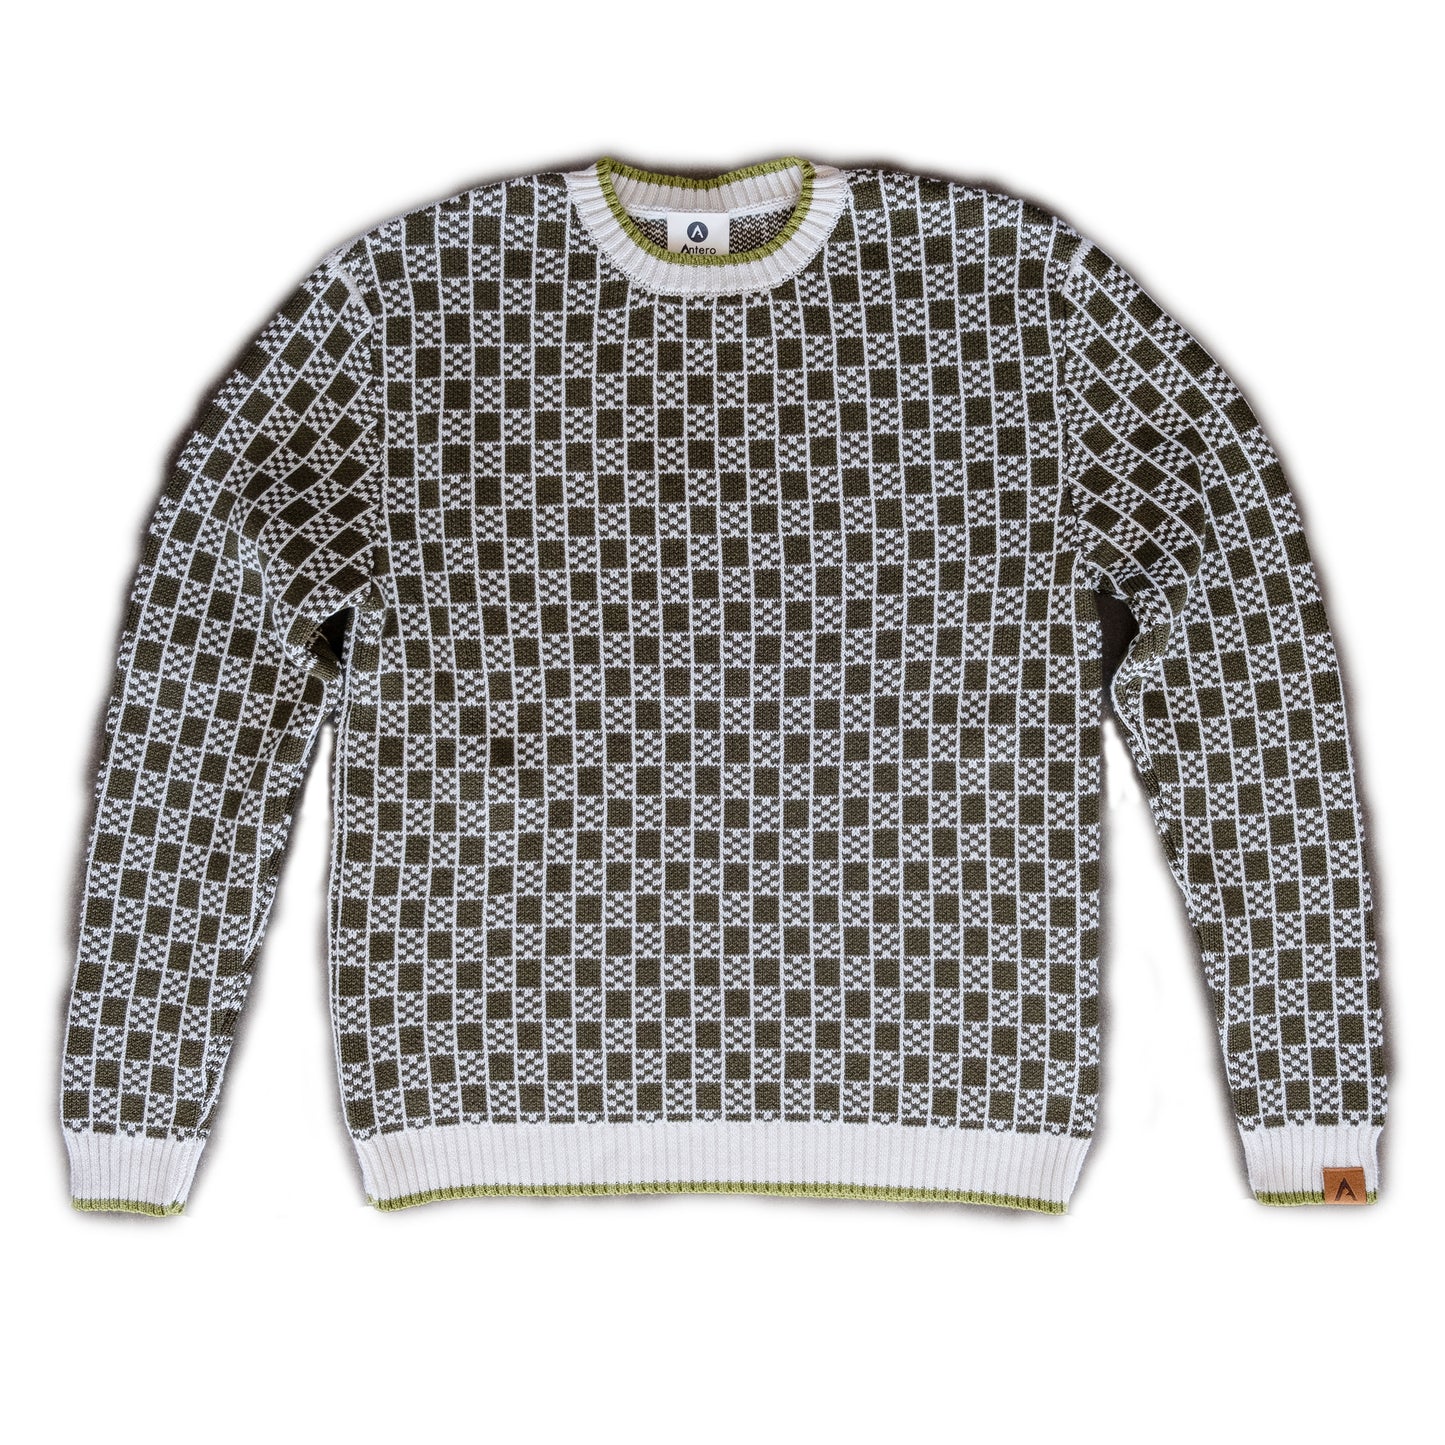 Patterned Crew Sweater - Olive Green / Natural